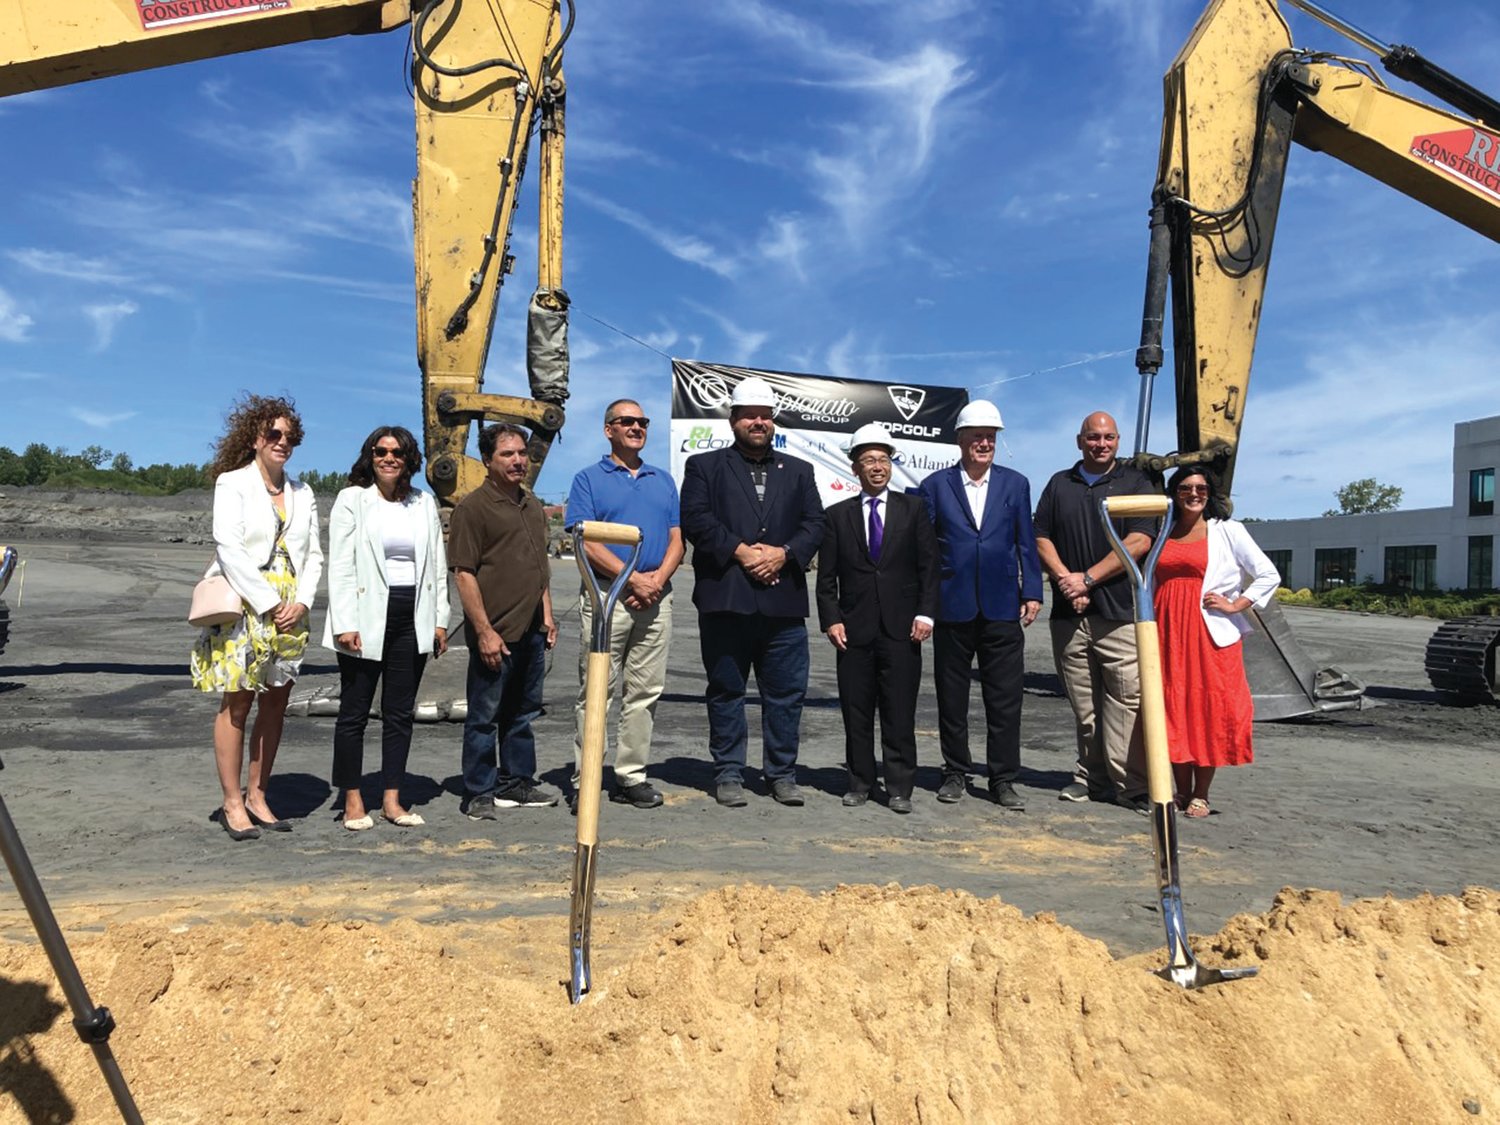 BREAKING GROUND: Phase one of site construction for Topgolf began July 27.